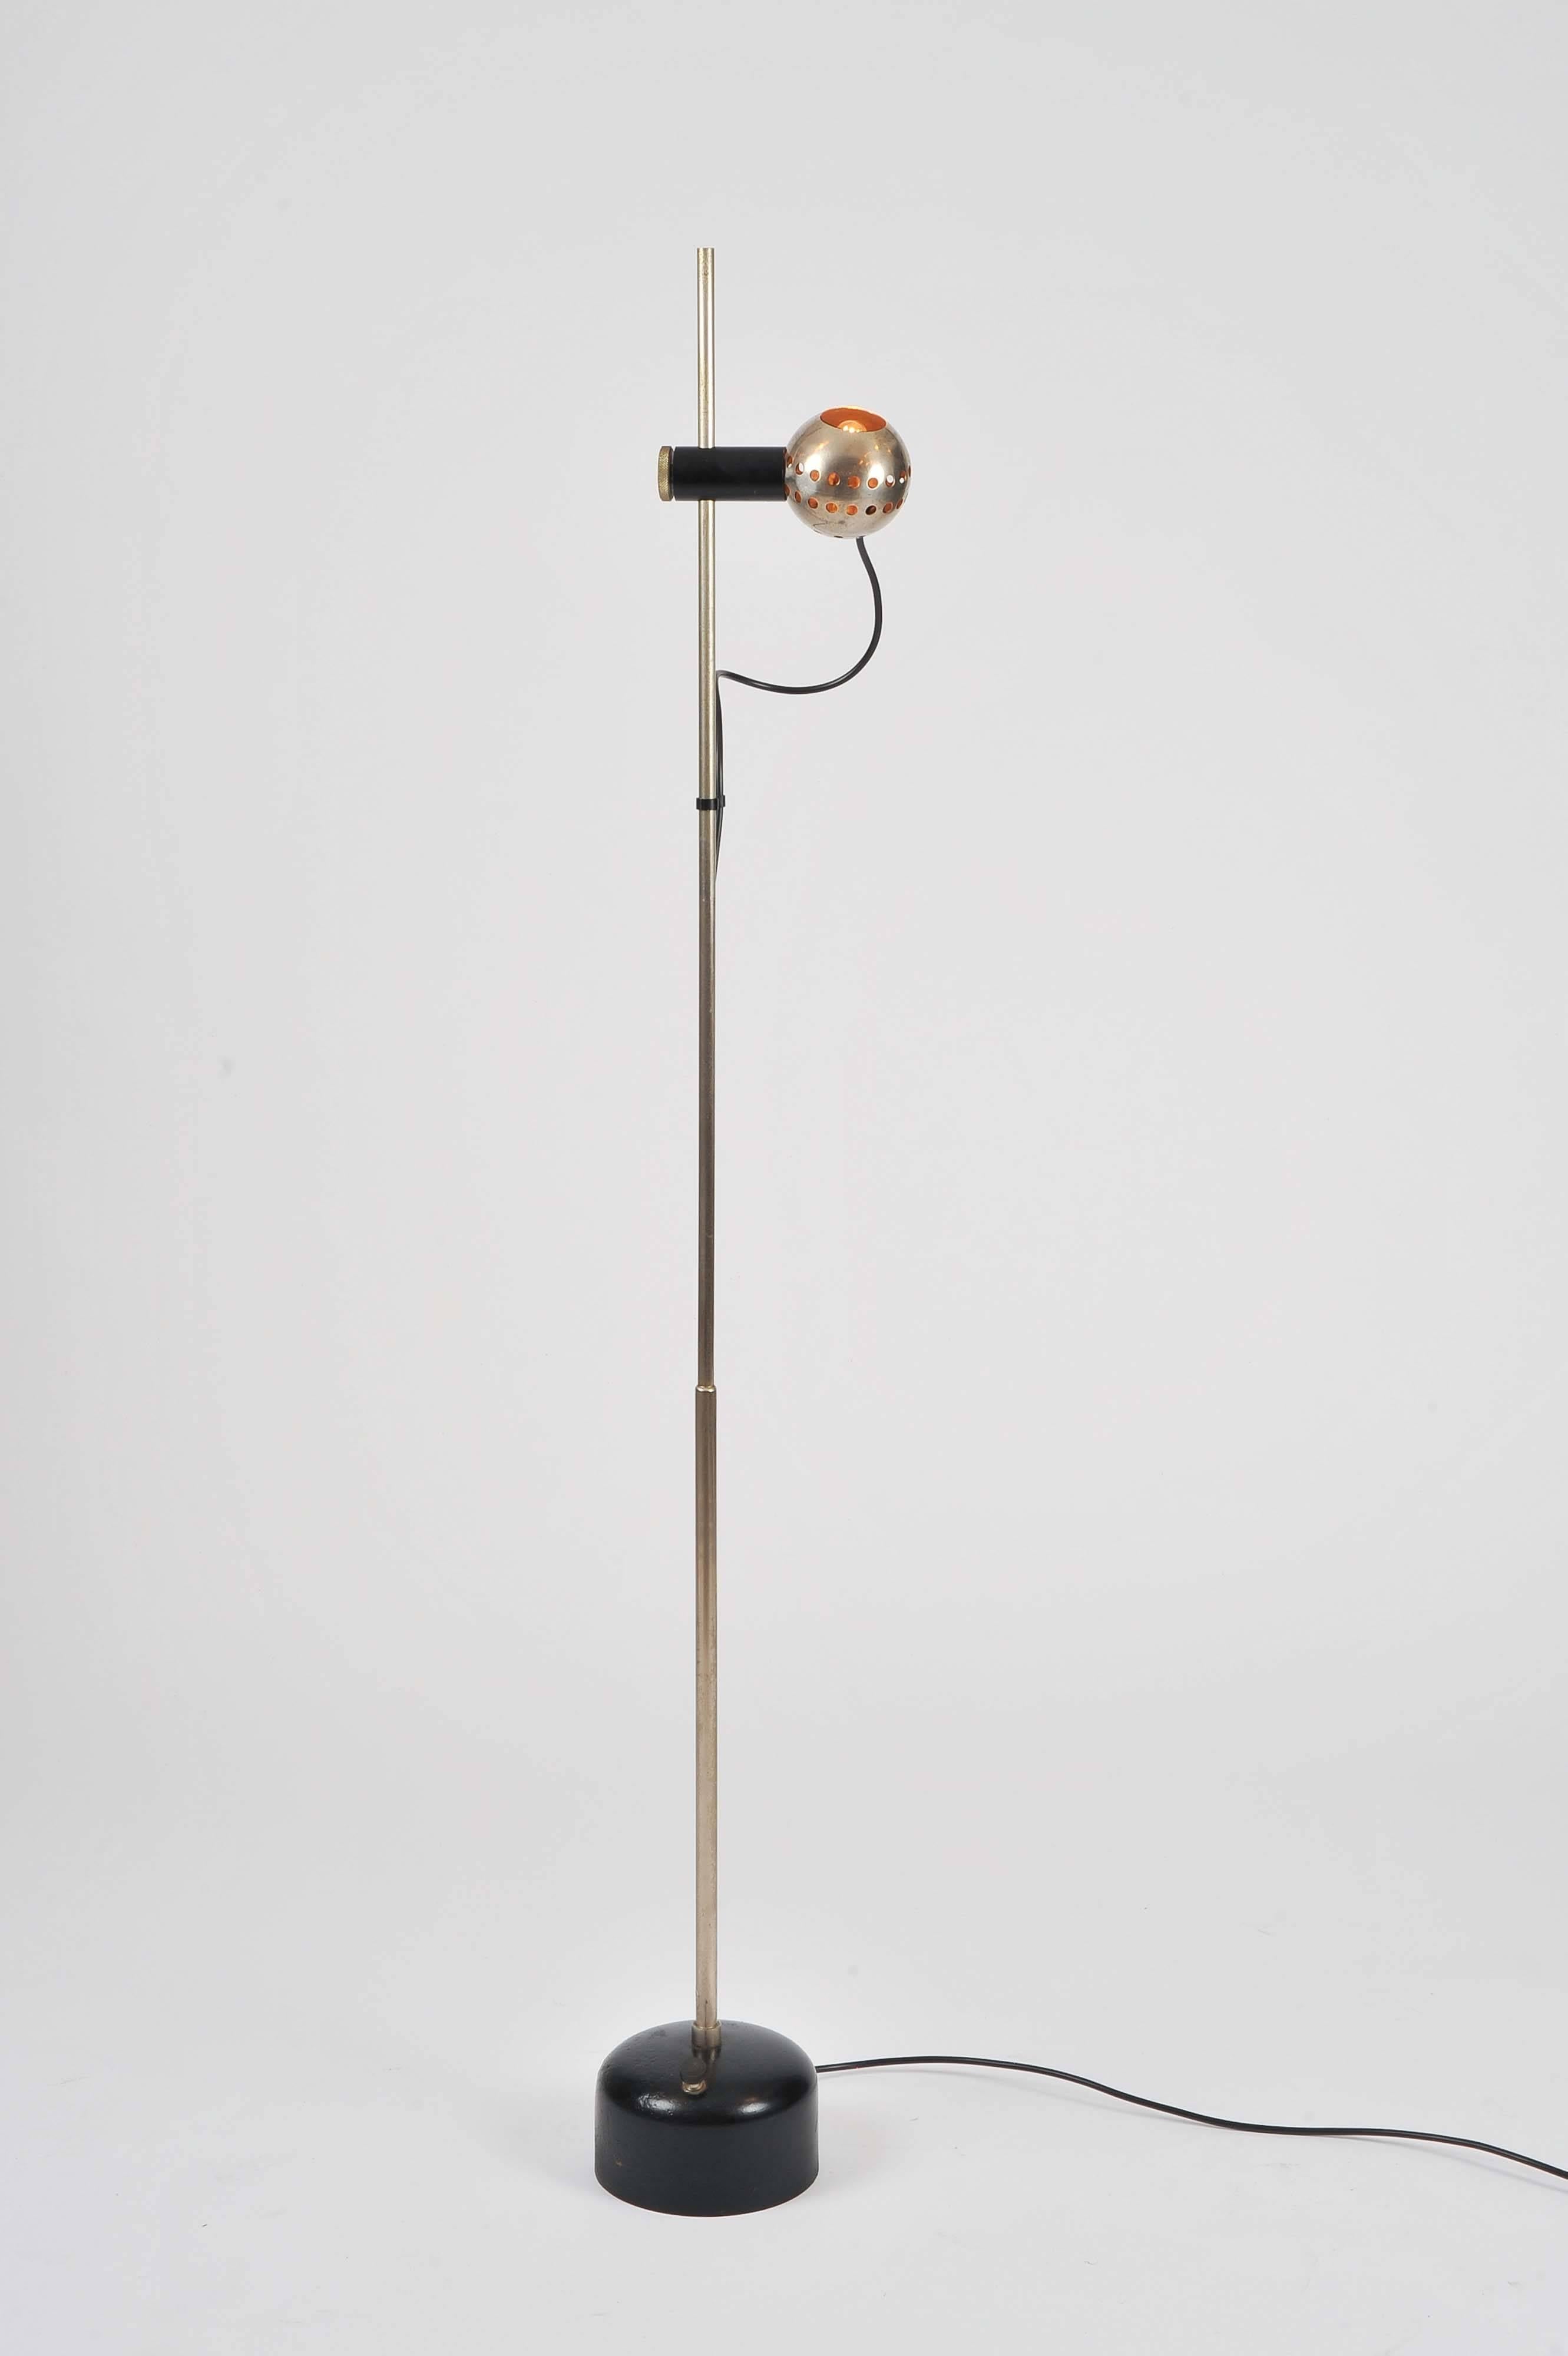 Minimalist floor lamp with magnetic shade by Angelo Lelli

With rare design shade. Very heavy stabilizing base.